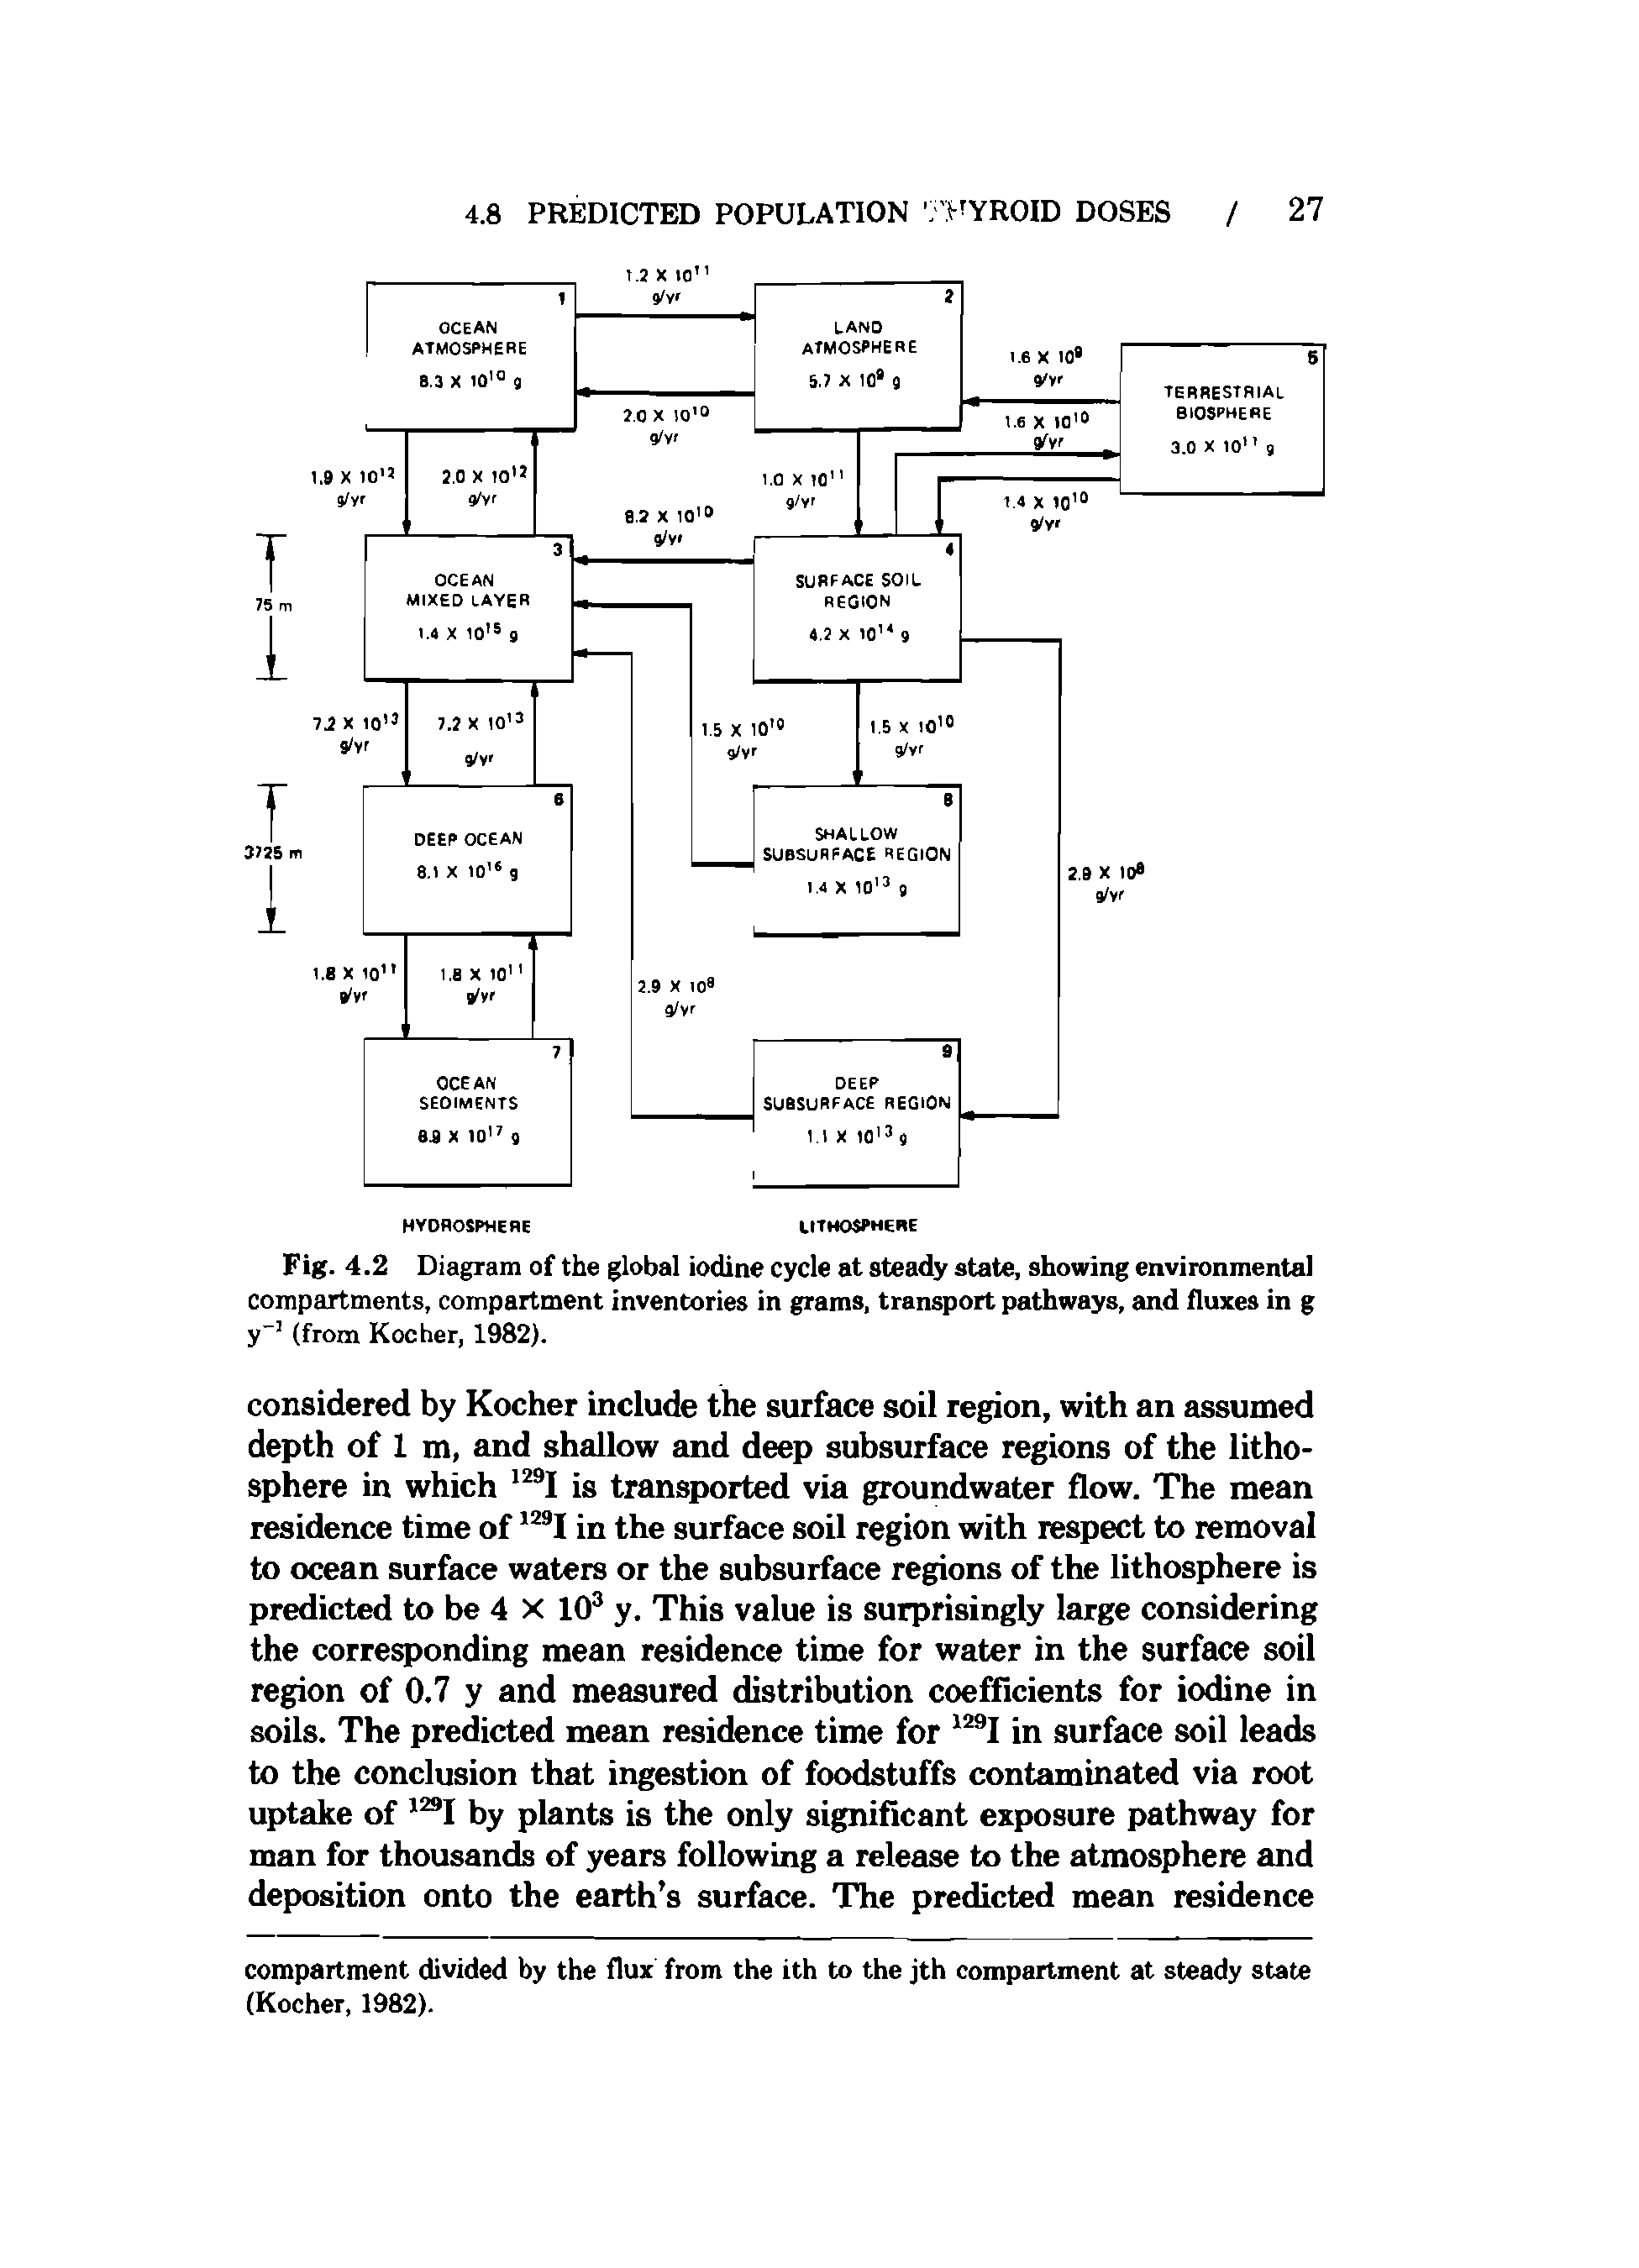 Fig. 4.2 Diagram of the global iodine cycle at steady state, showing environmental compartments, compartment inventories in grams, tran ort pathways, and fluxes in g y" (from Kocher, 1982).